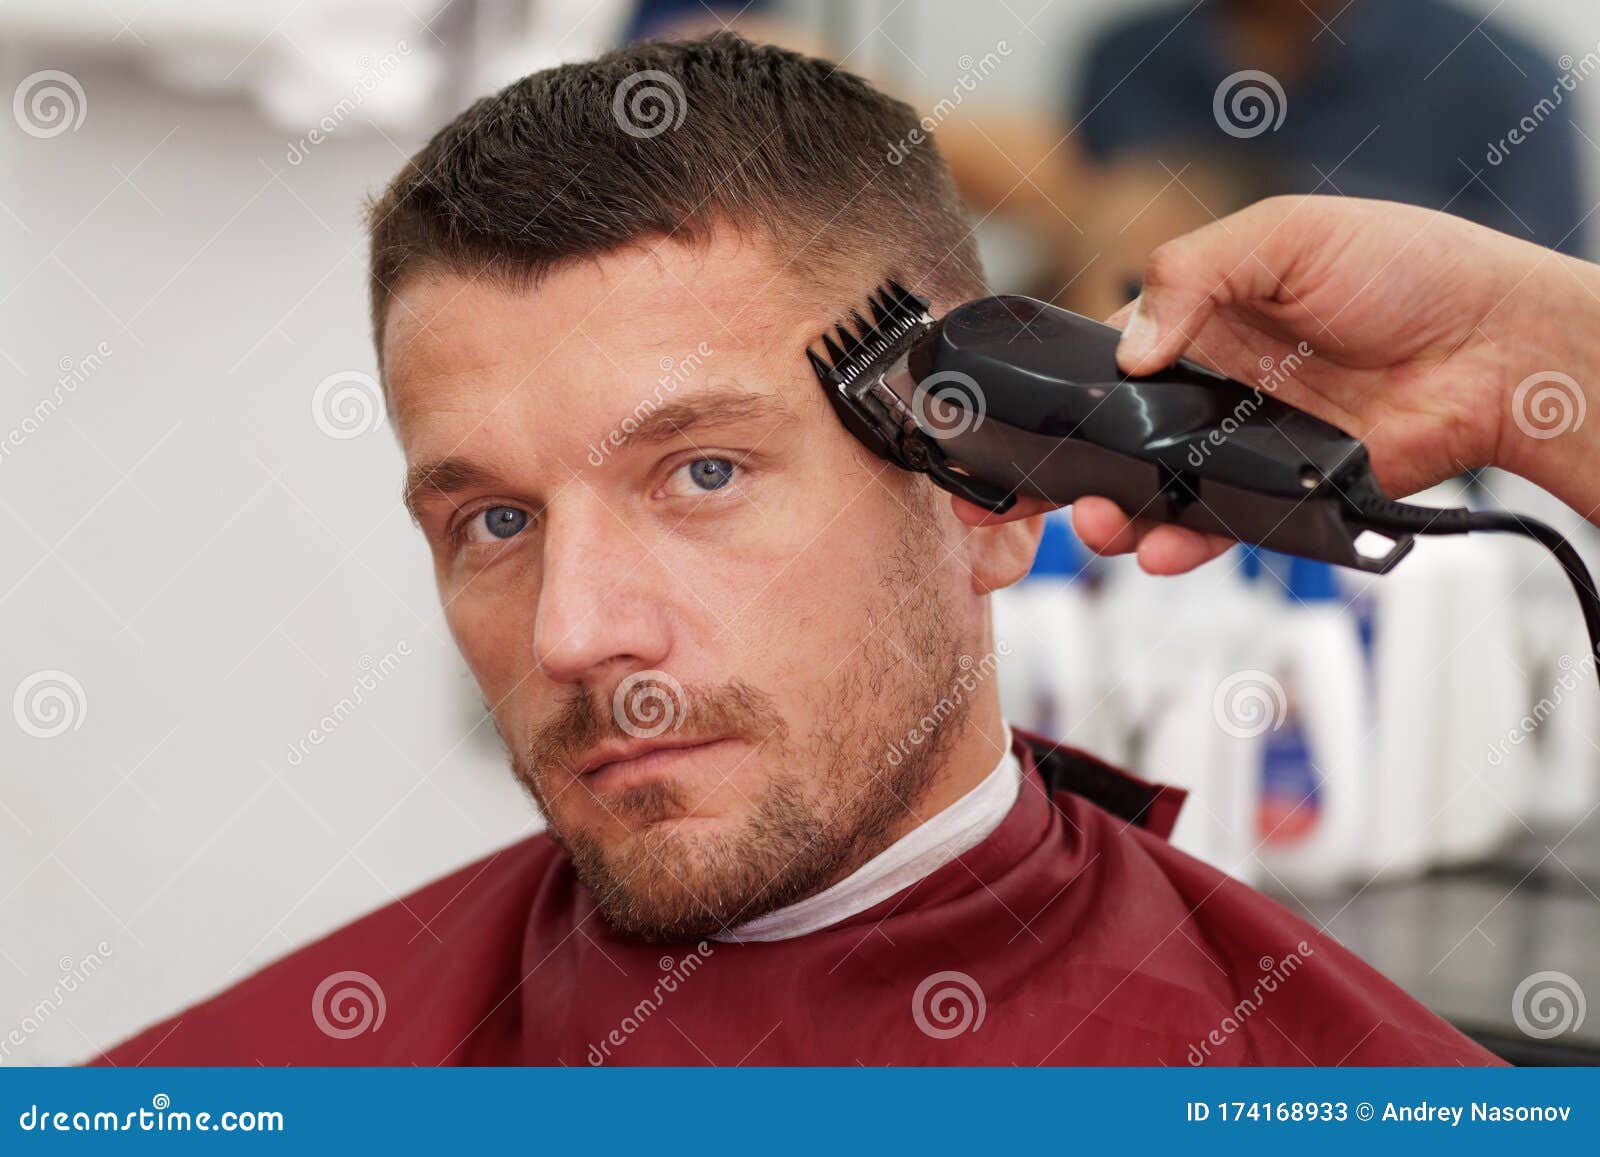 male client getting haircut by hairdresser.